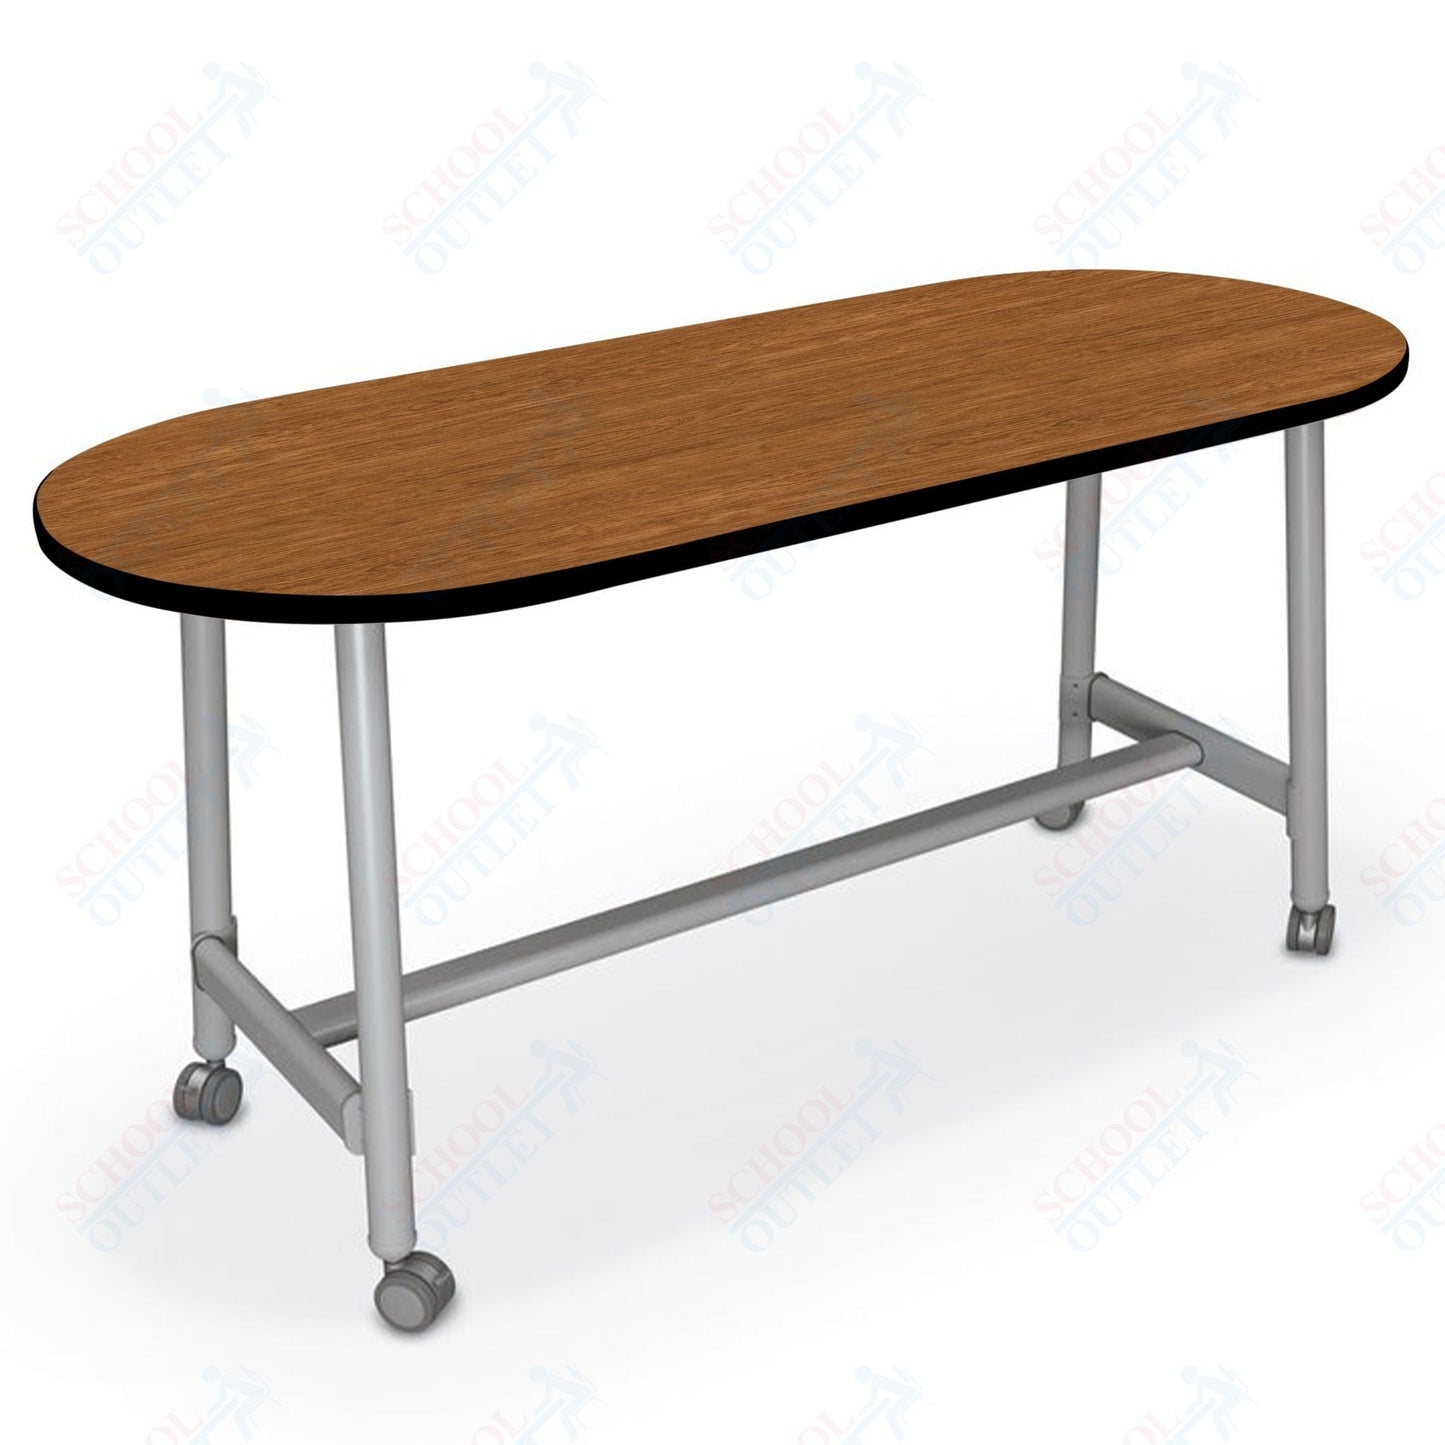 Mooreco Akt Table – 30"D x 72"W Racetrack, Laminate Top, Fixed Height Available in 29"H, 36"H, or 42"H - SchoolOutlet